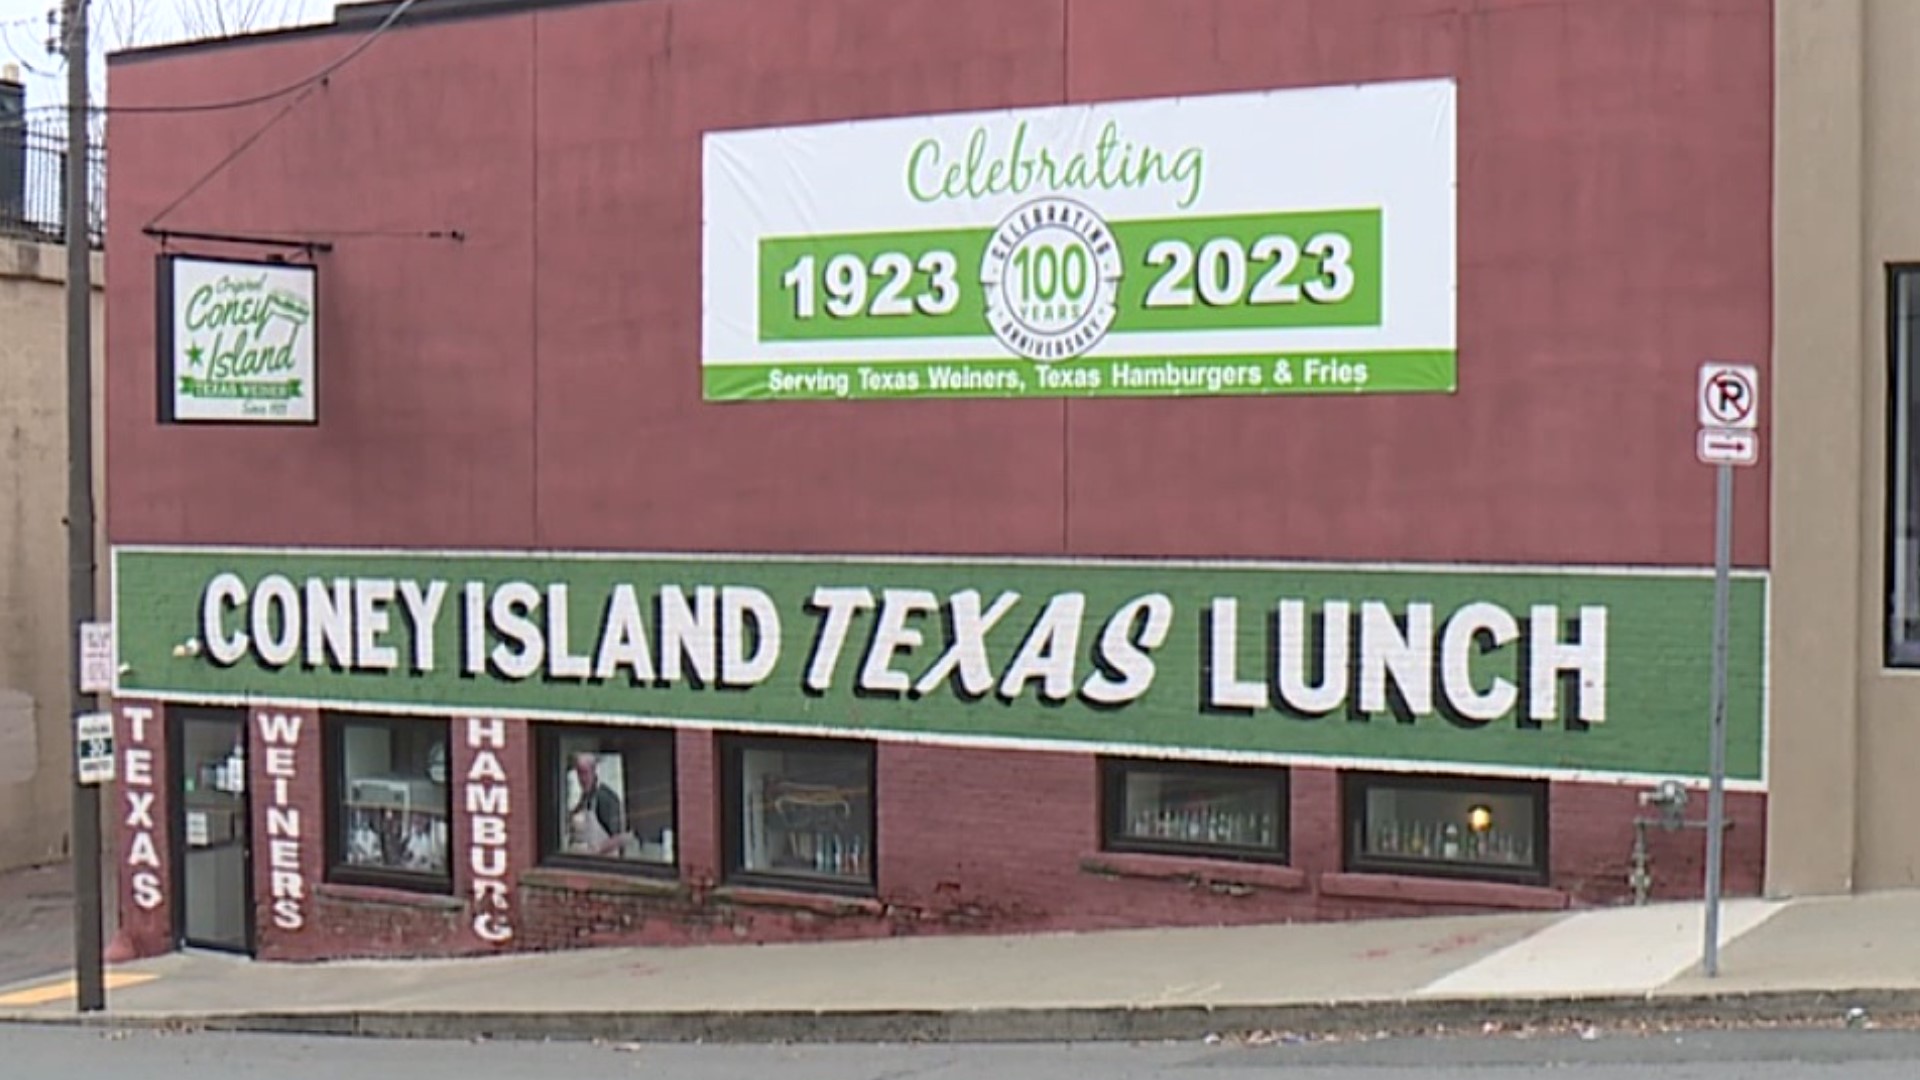 Newswatch 16's Courtney Harrison spoke with the owner and customers about what keeps people coming back.